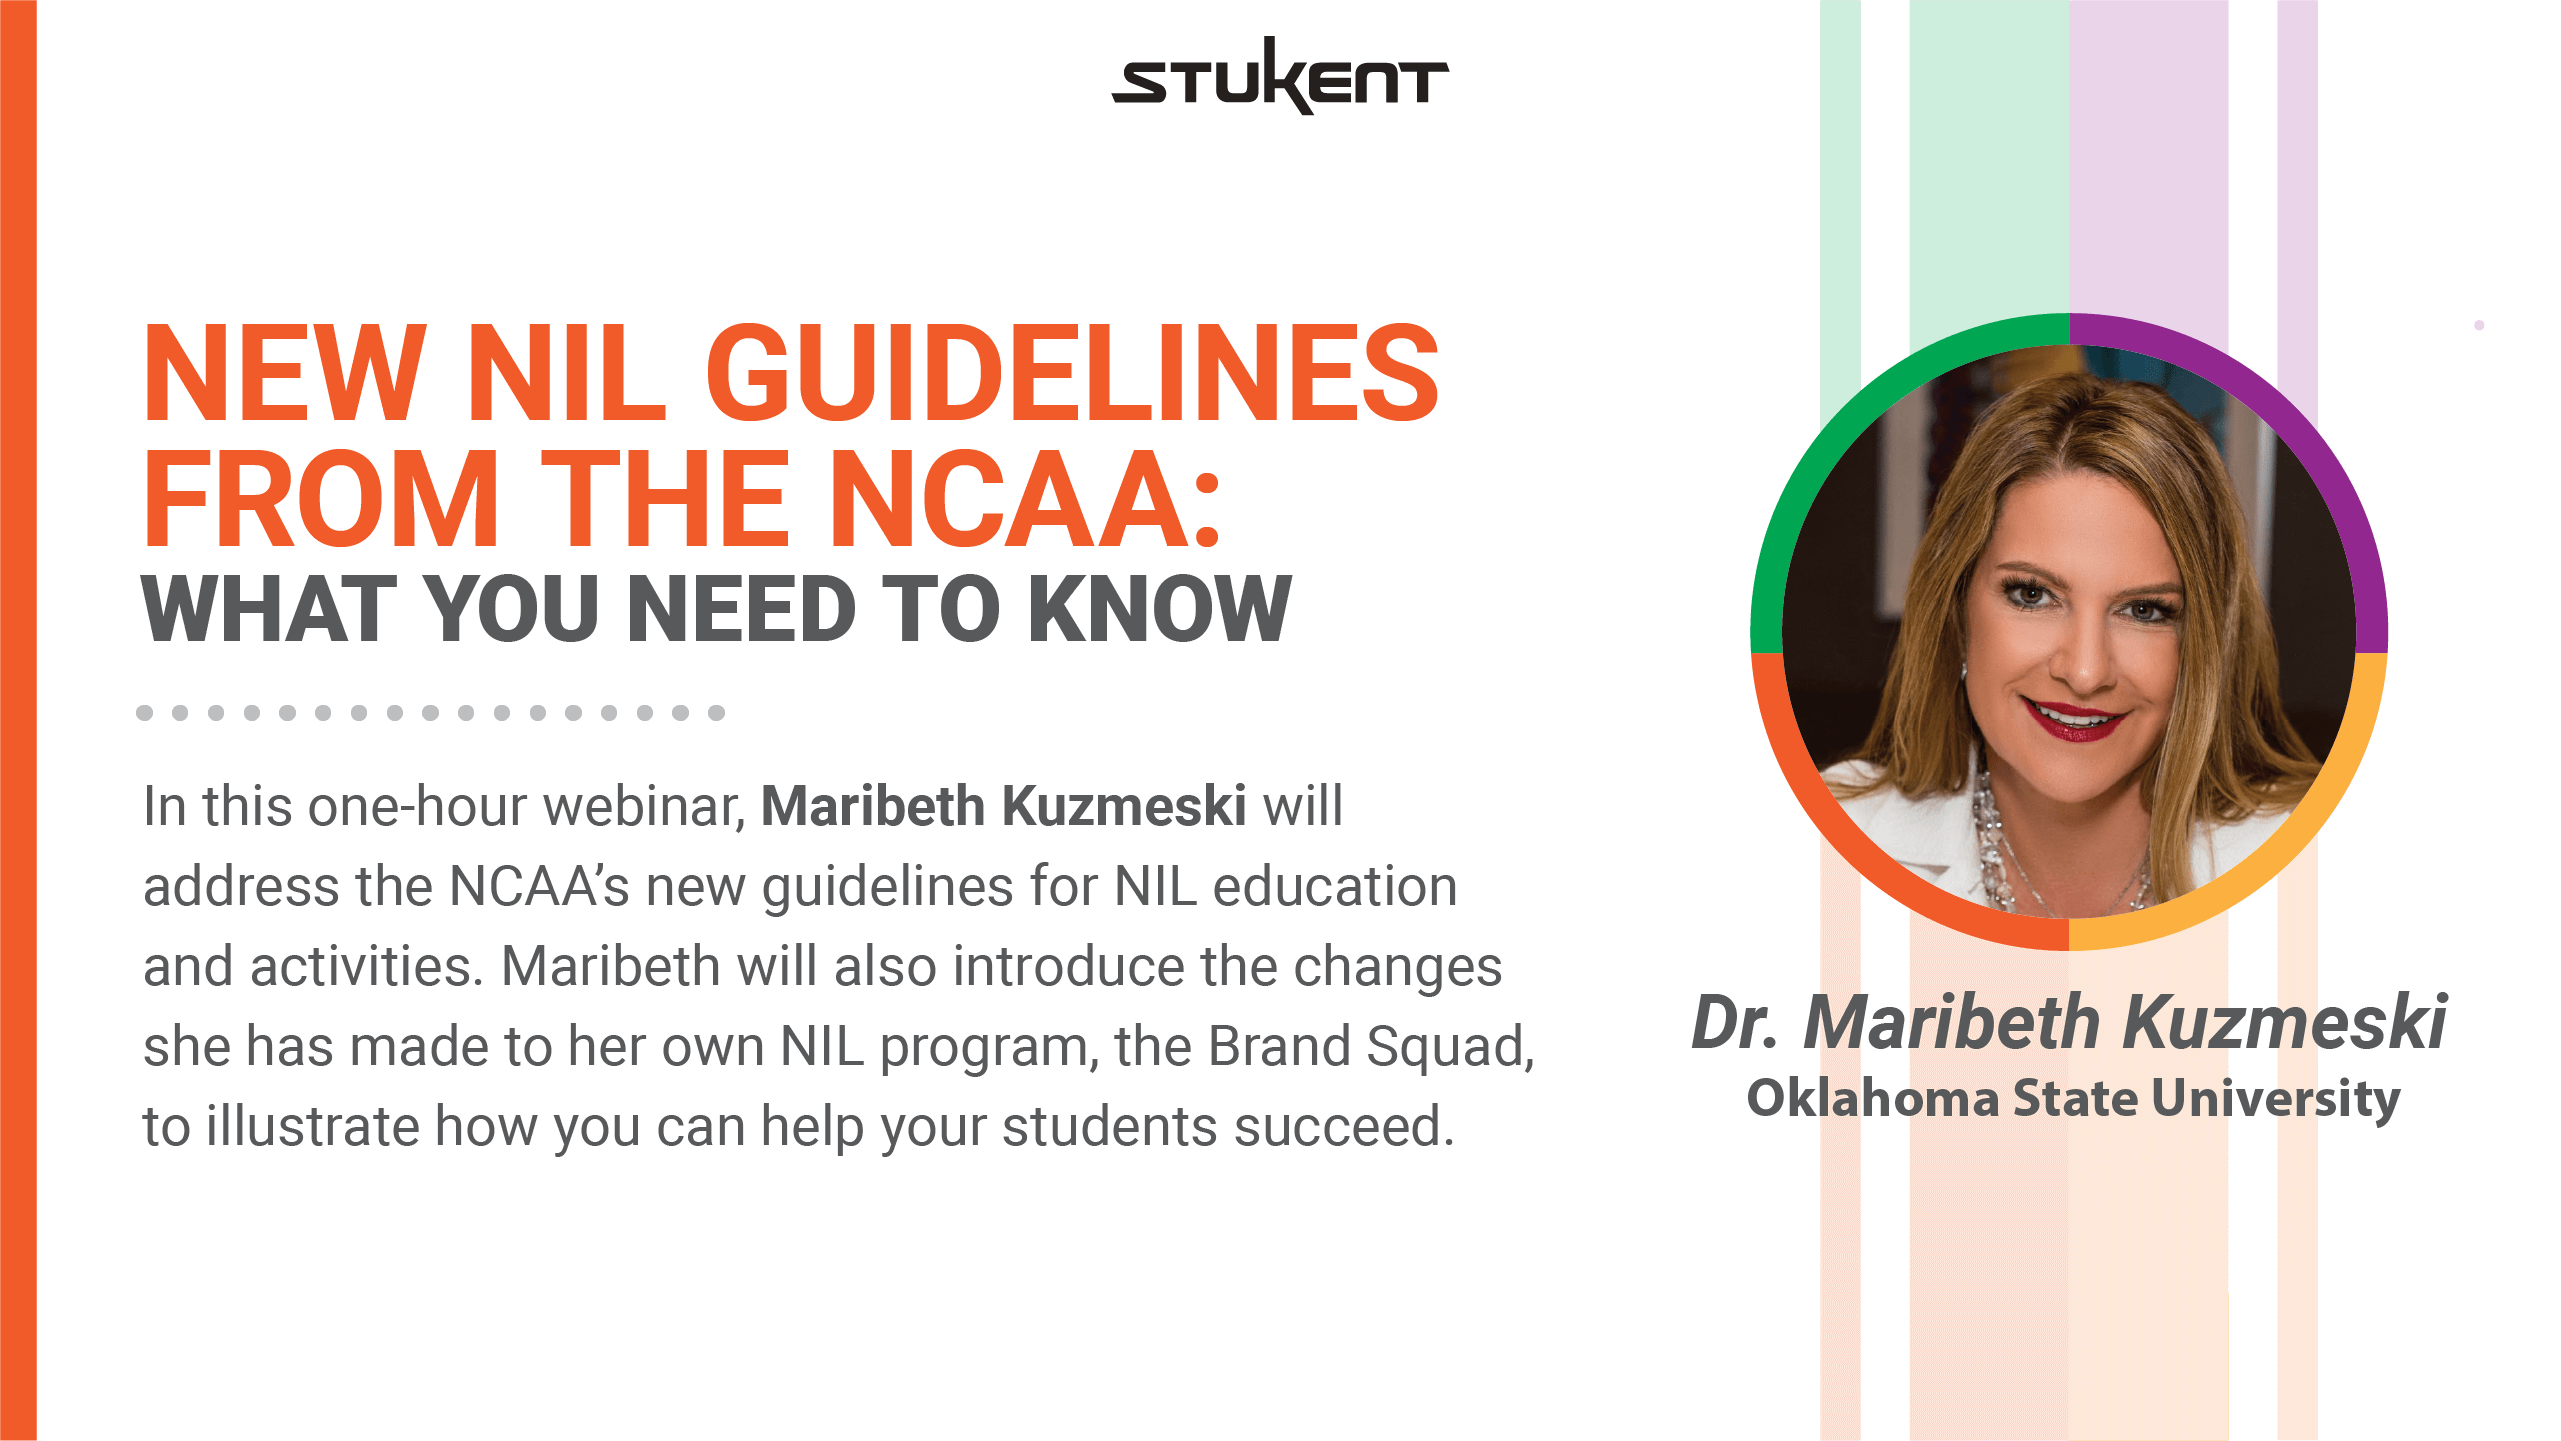 New NIL Guidelines From the NCAA: What You Need to Know